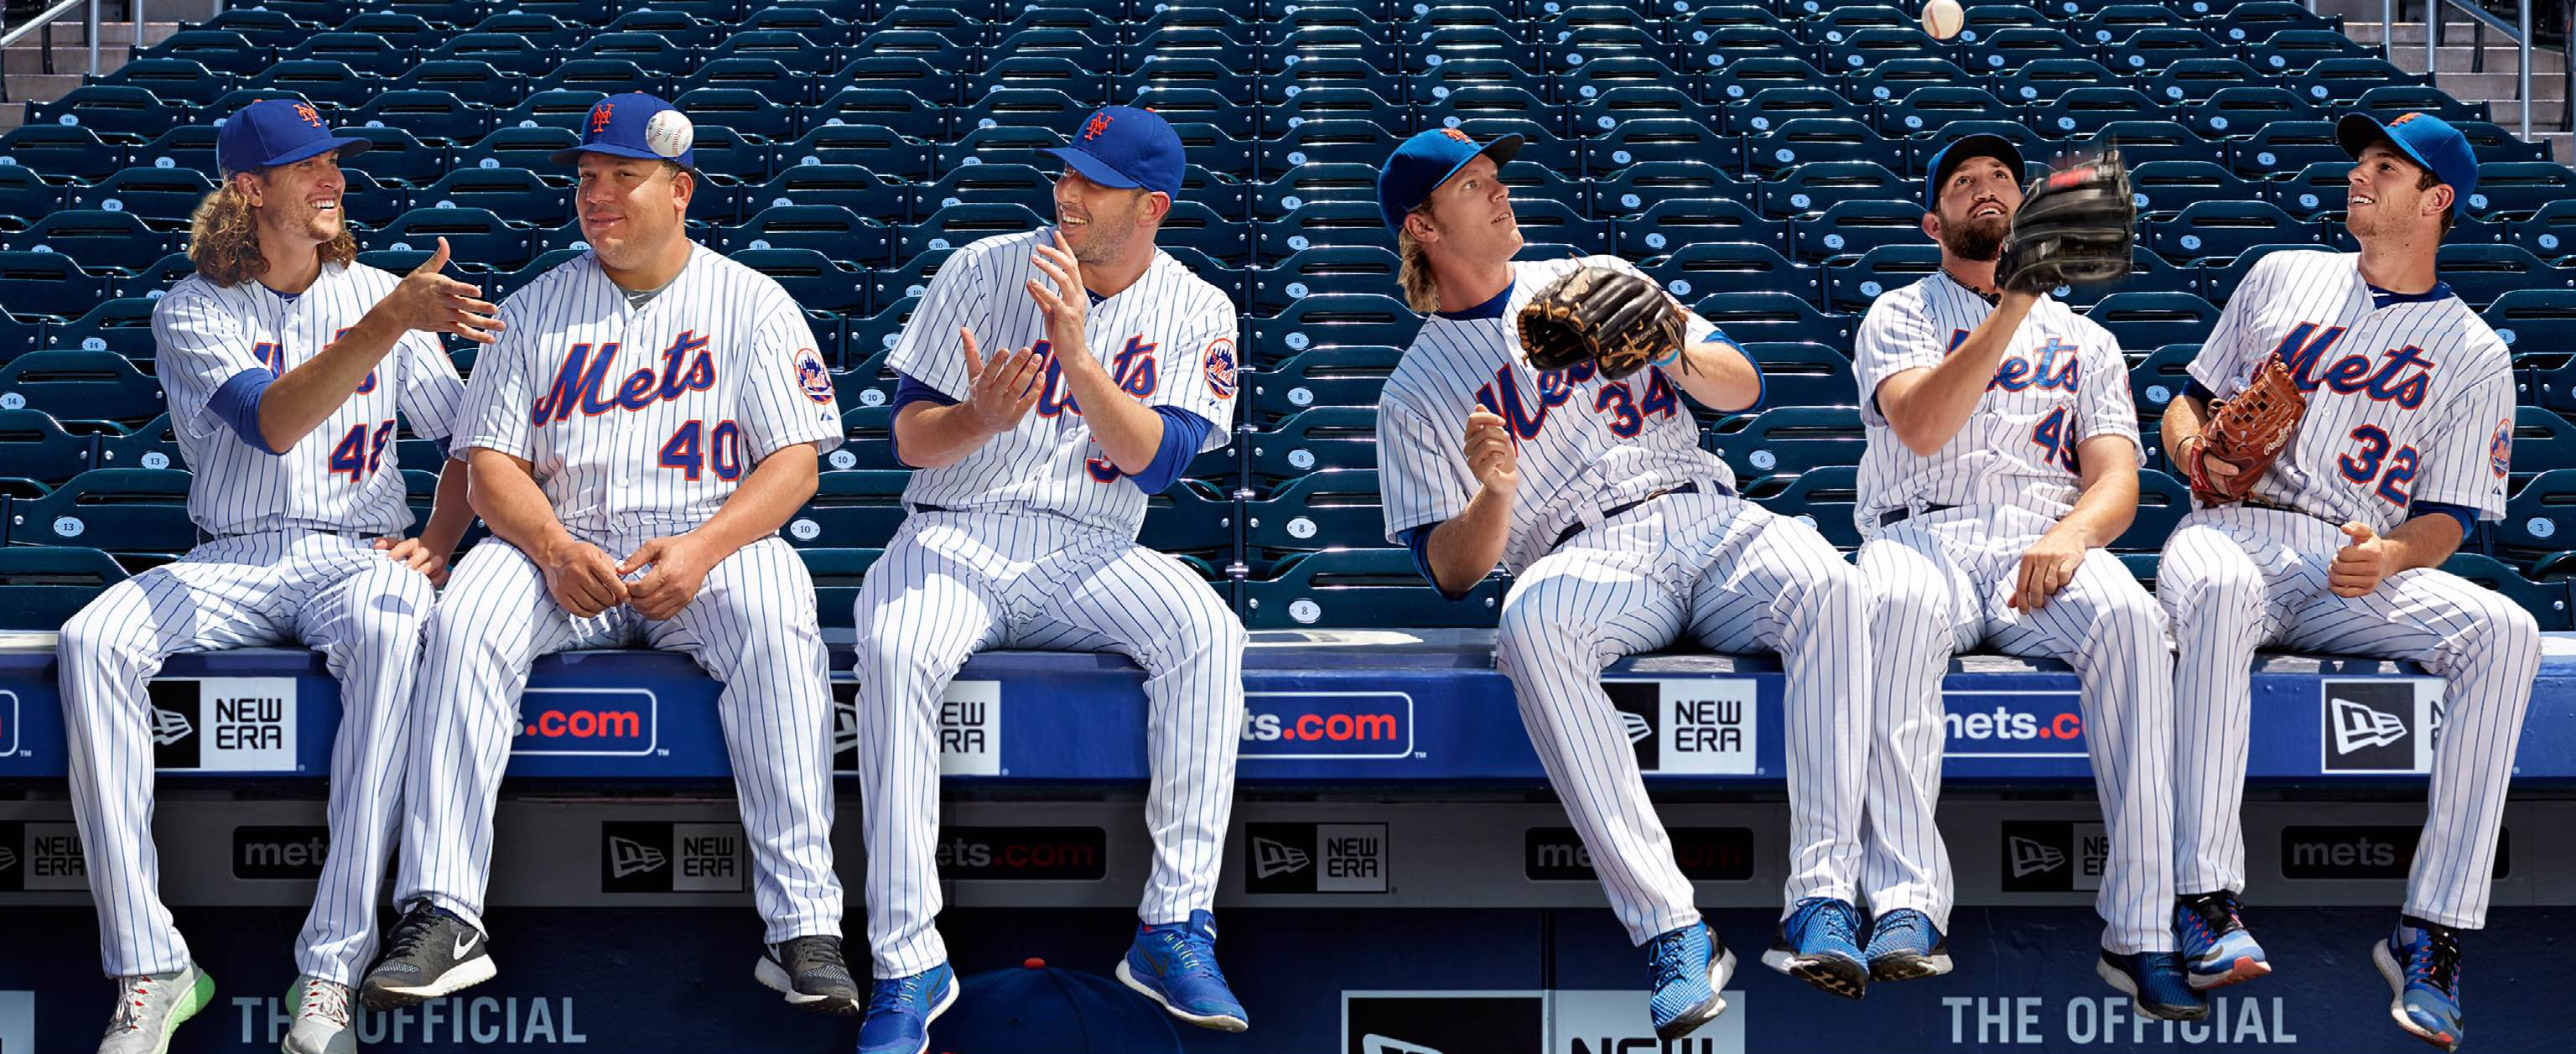 Here Is A High Quality Photo Of The Strike Force - York Mets New Uniforms 2012 - HD Wallpaper 